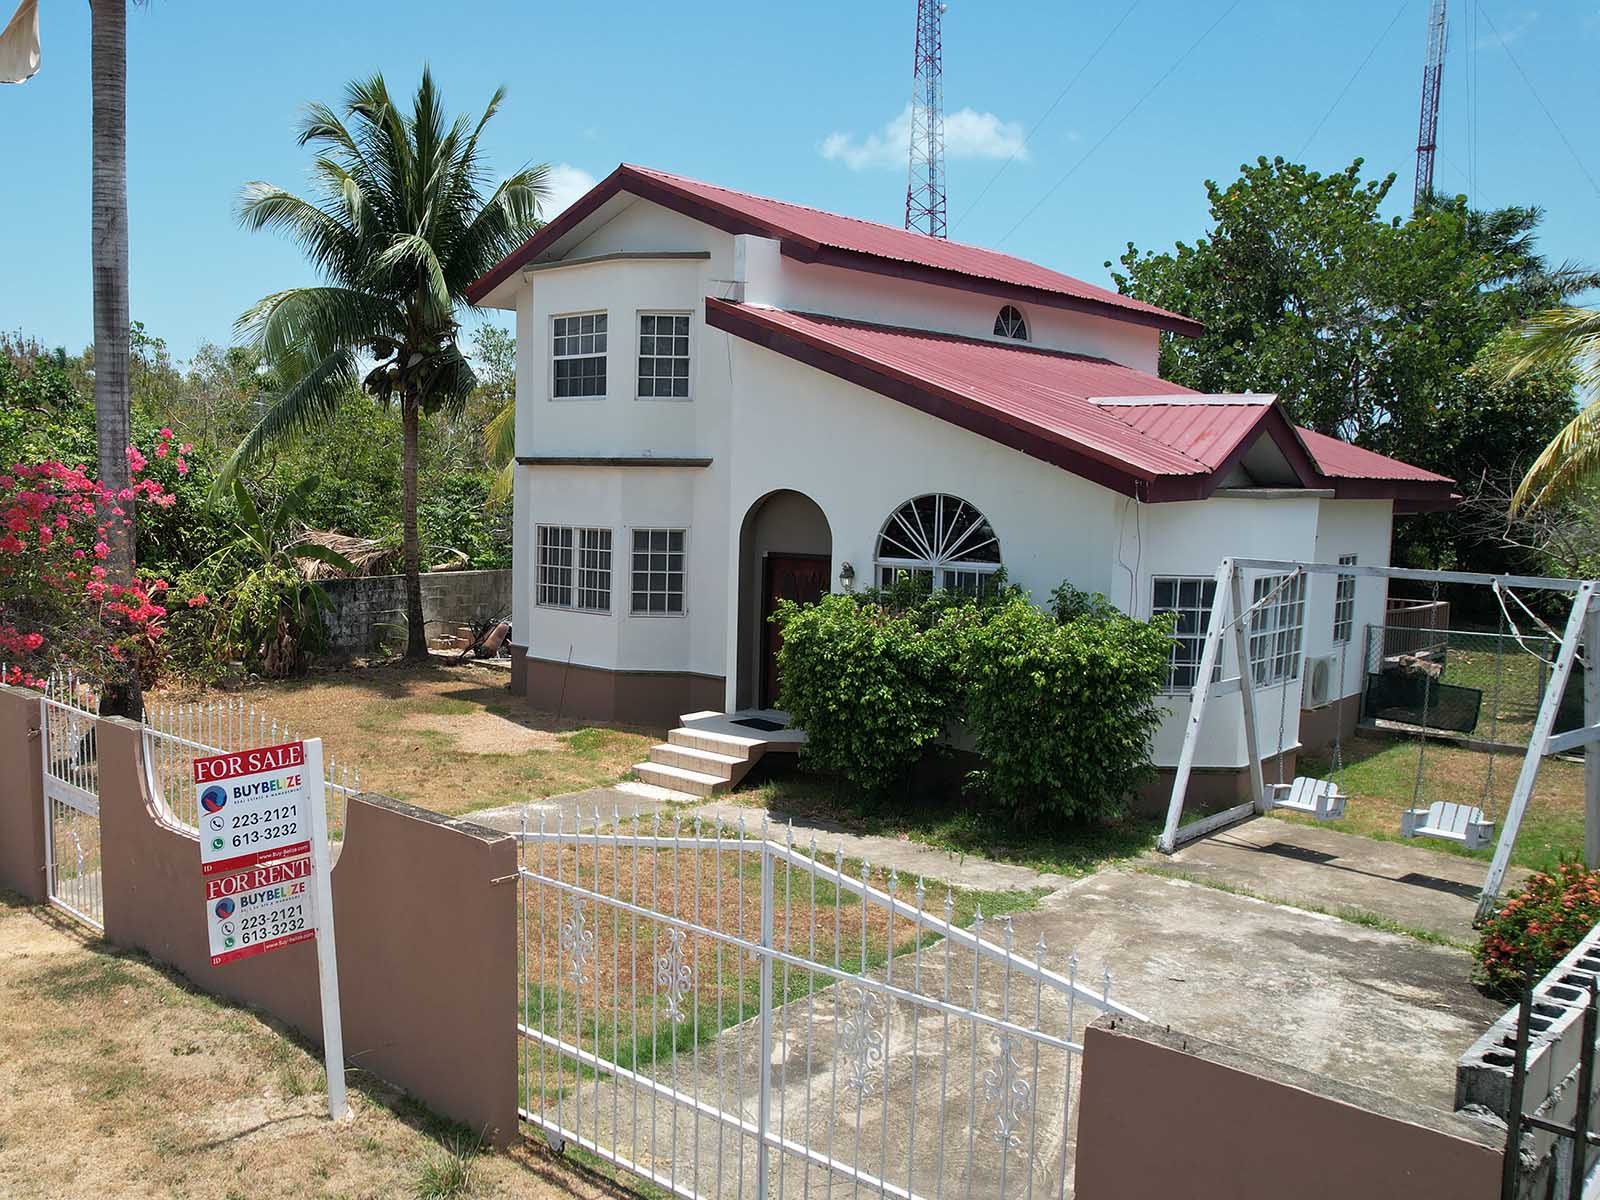 FOR-SALE: Two Story 3 Bed Residence located in Lake Garden, Ladyville Belize.